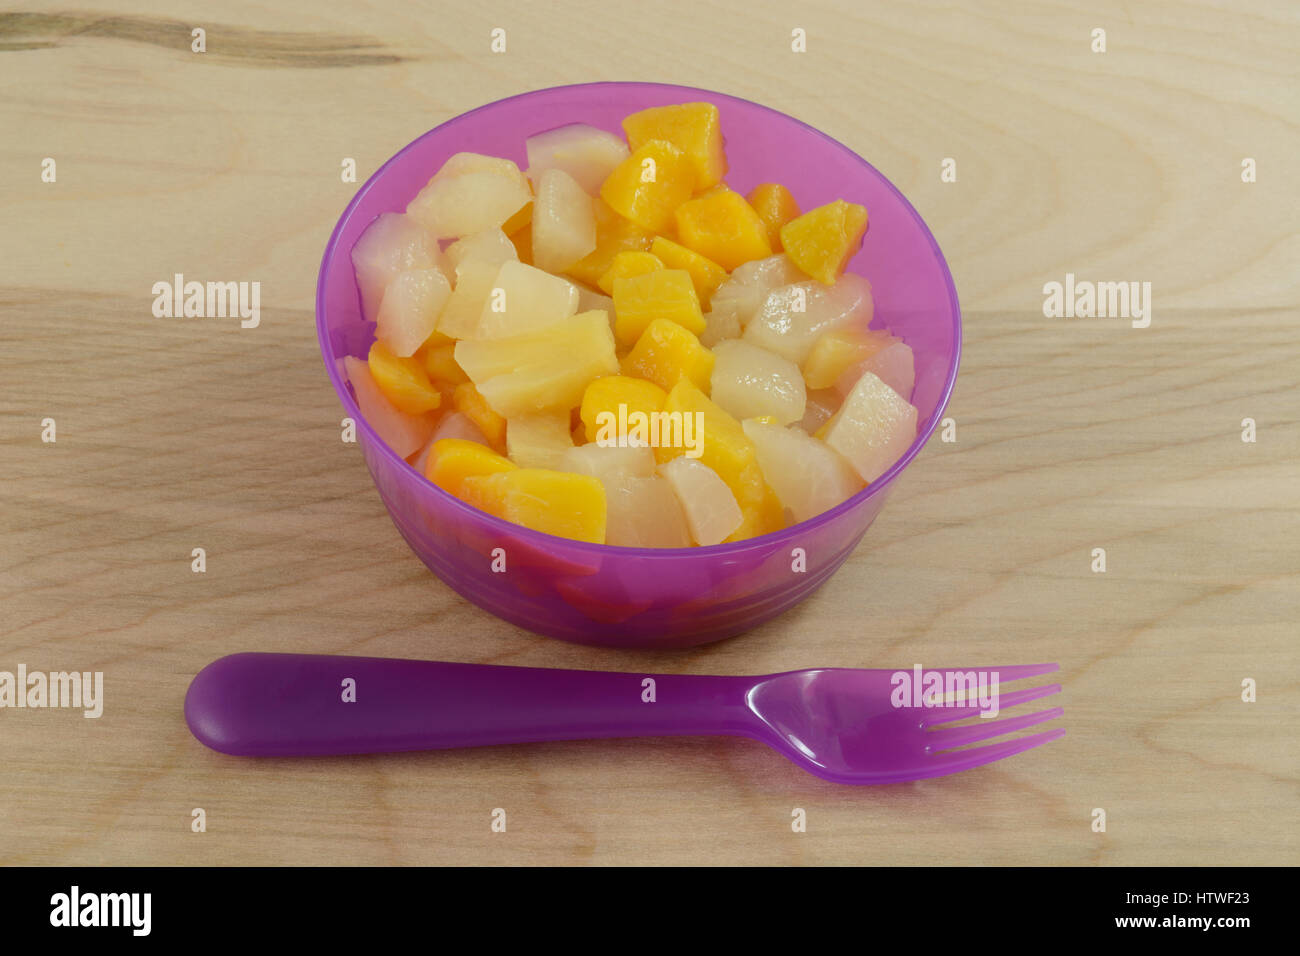 Canned mixed fruit cocktail in plastic purple portable bowl Stock Photo